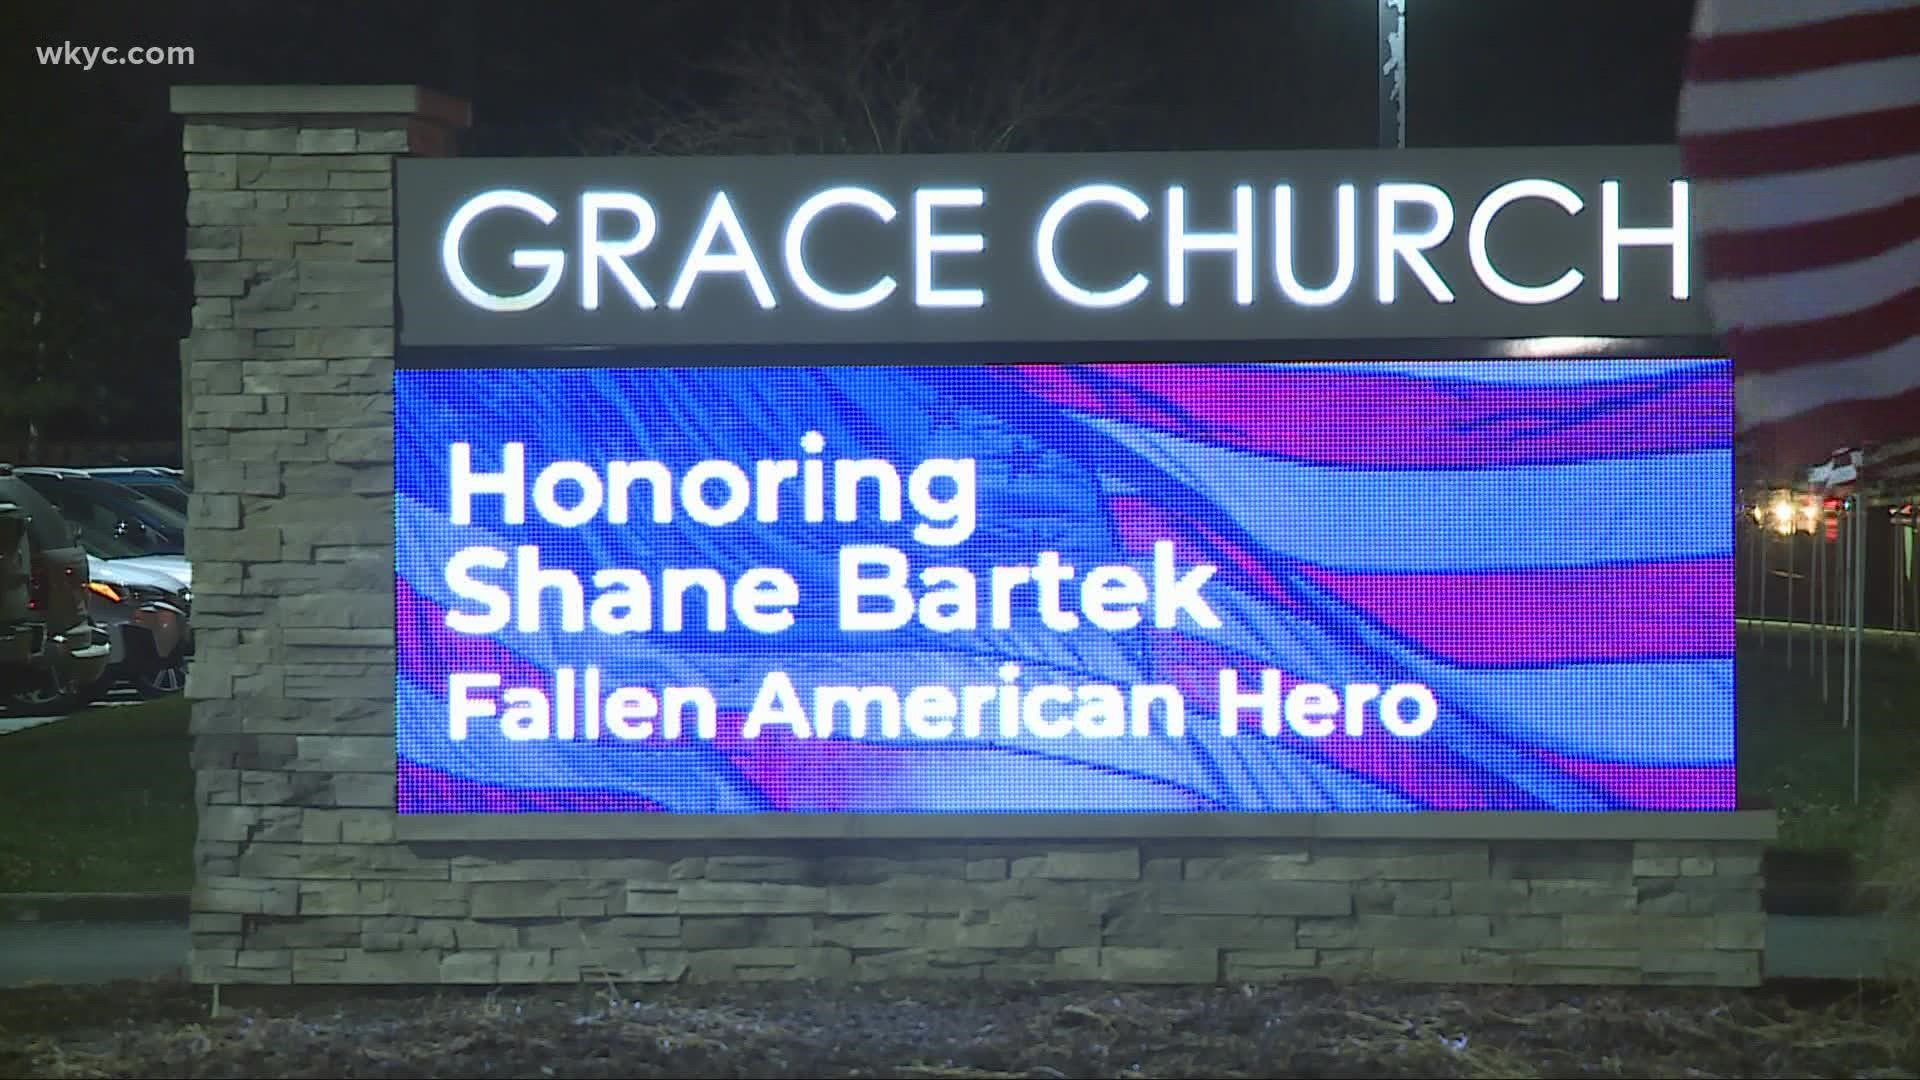 The Bartek family received friends at Grace Church Monday evening. Funeral services will be held on Tuesday.